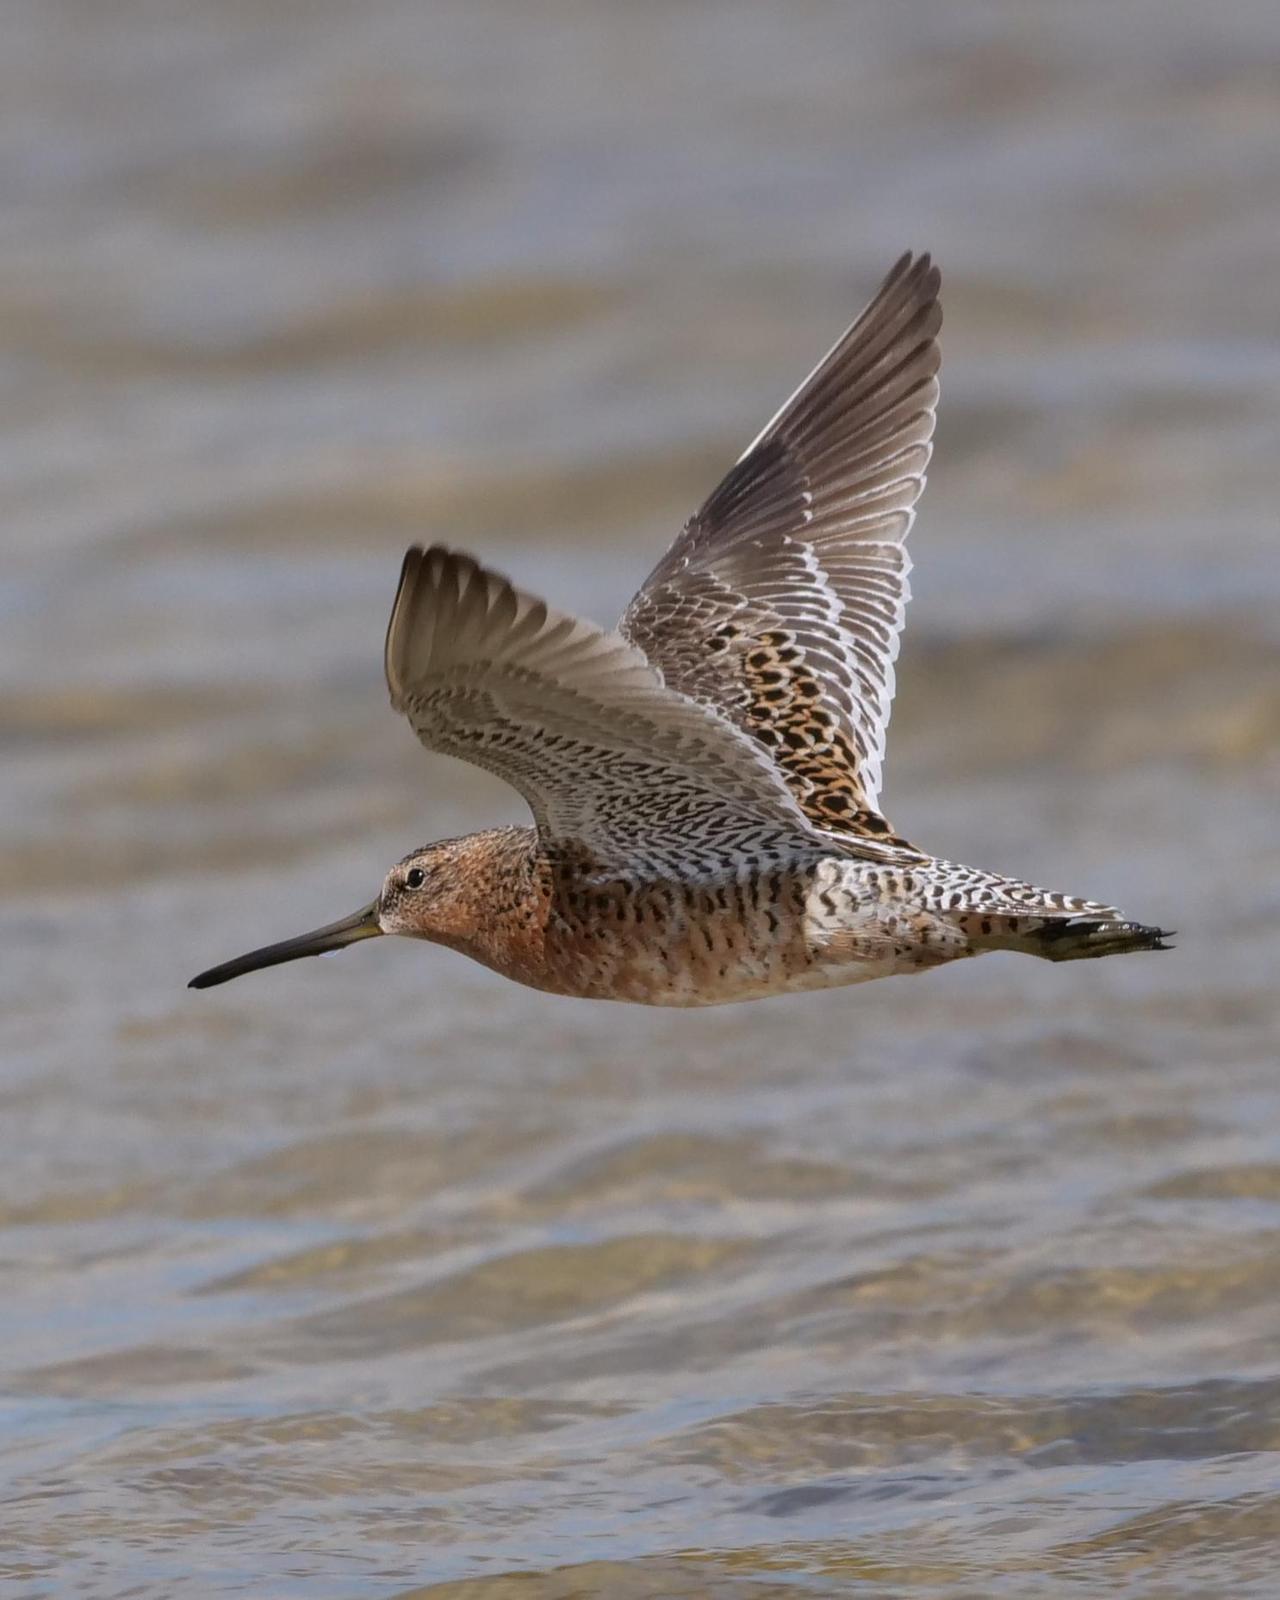 Short-billed Dowitcher Photo by Steve Percival